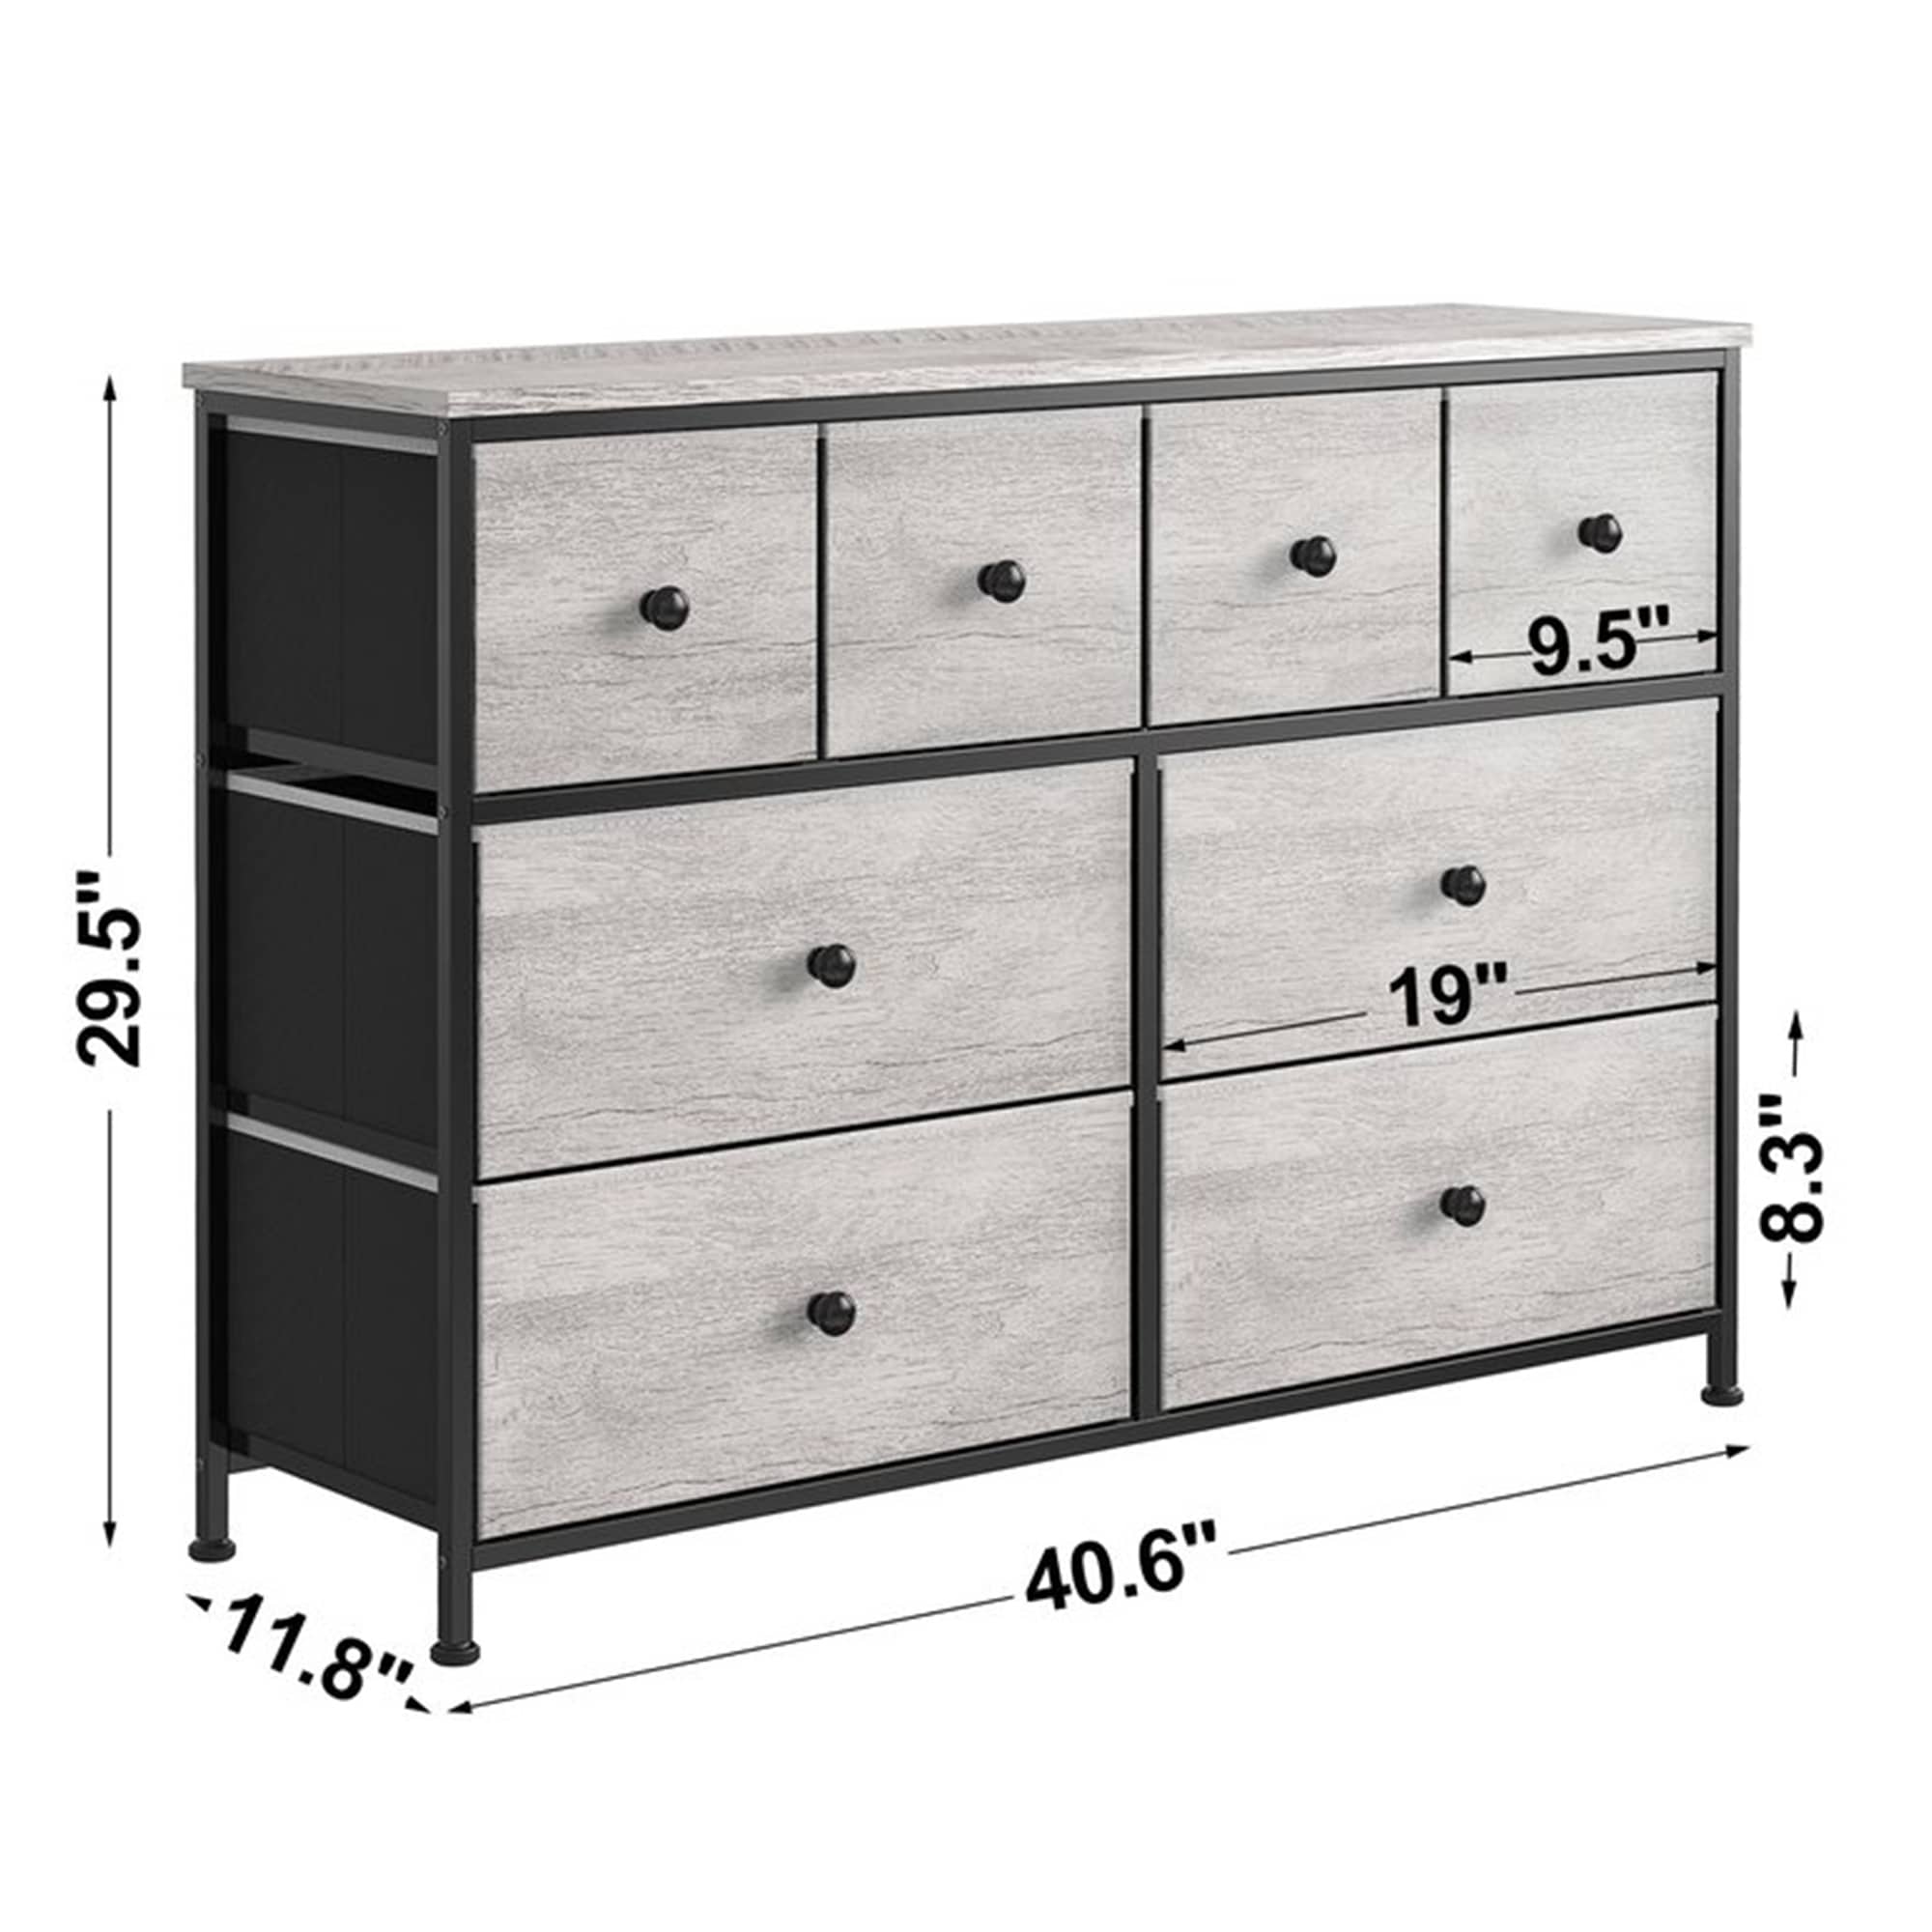 https://ak1.ostkcdn.com/images/products/is/images/direct/c0a5679941d27e217ea1025f24aefc81a89c05fc/REAHOME-8-Drawer-Steel-Frame-Bedroom-Storage-Organizer-Chest-Dresser%2C-Dark-Taupe.jpg